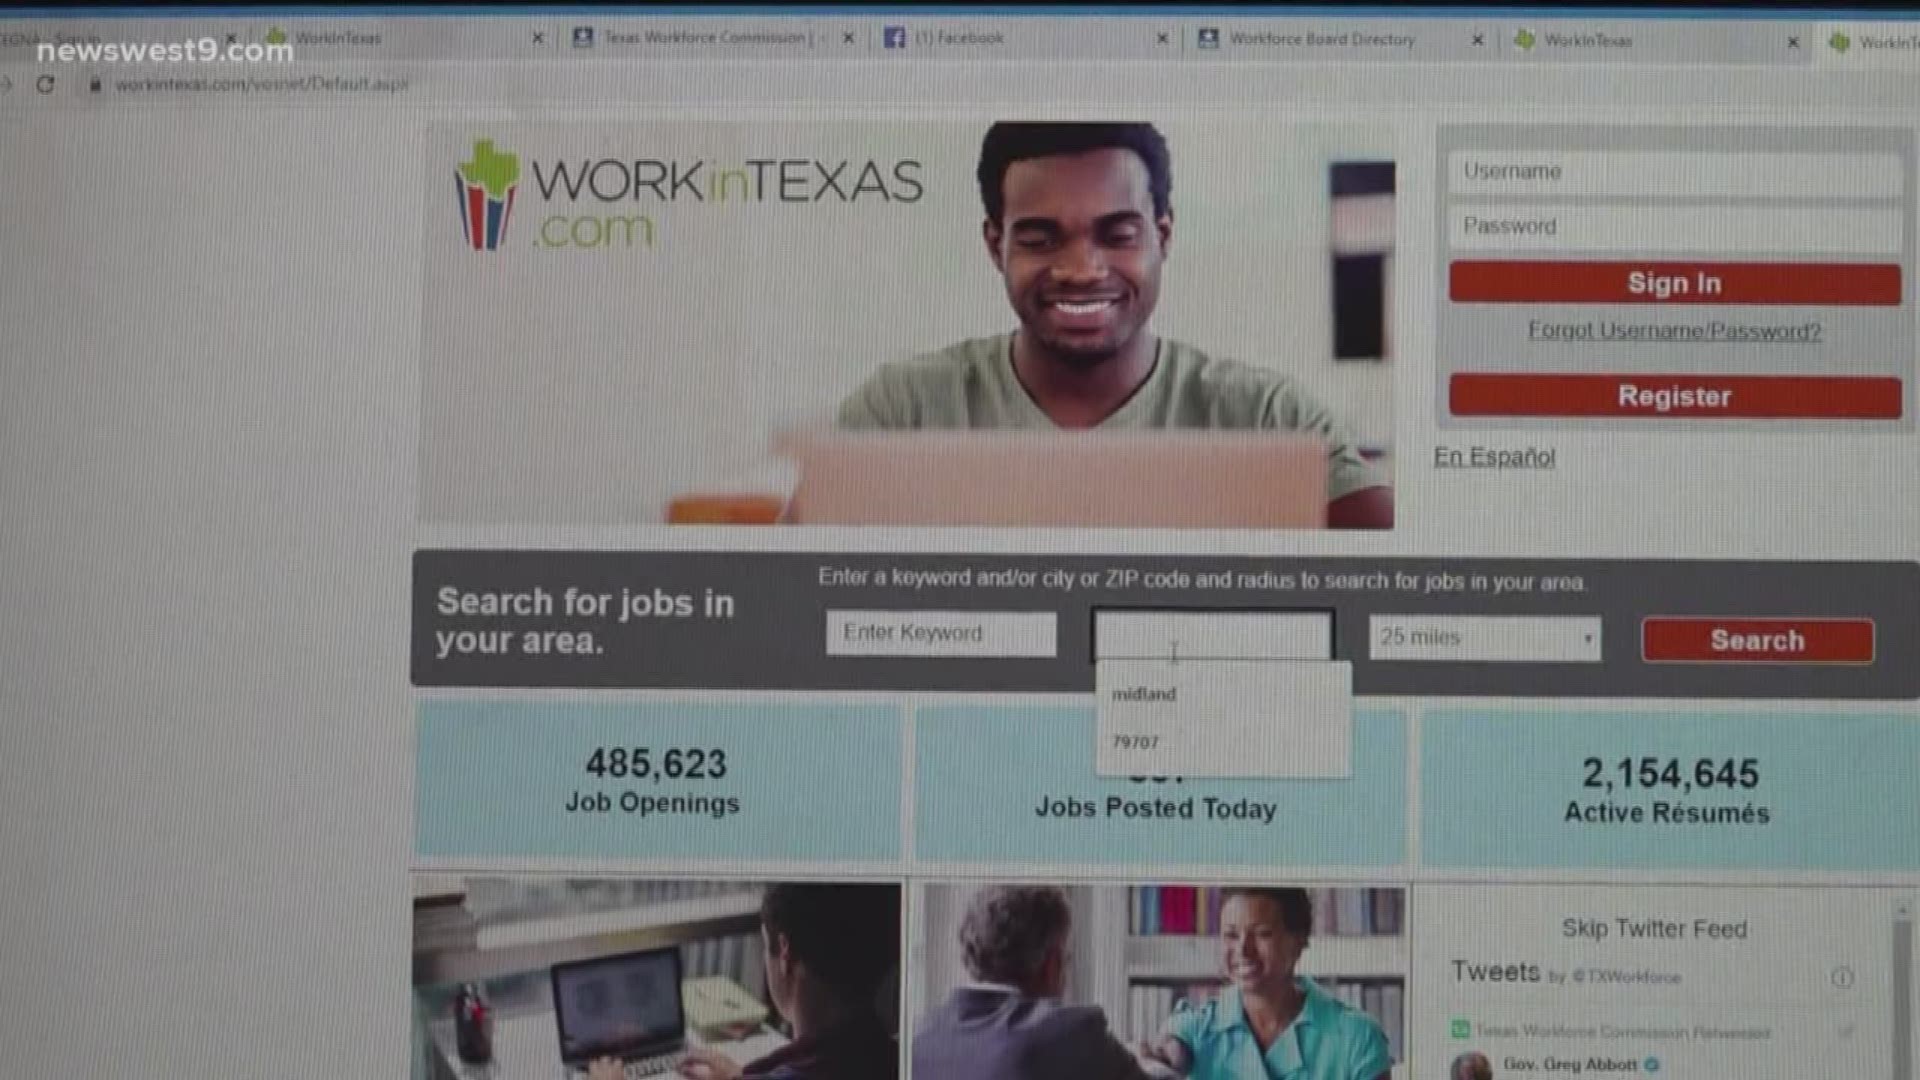 If you're looking for a job, you should visit workintexas.com